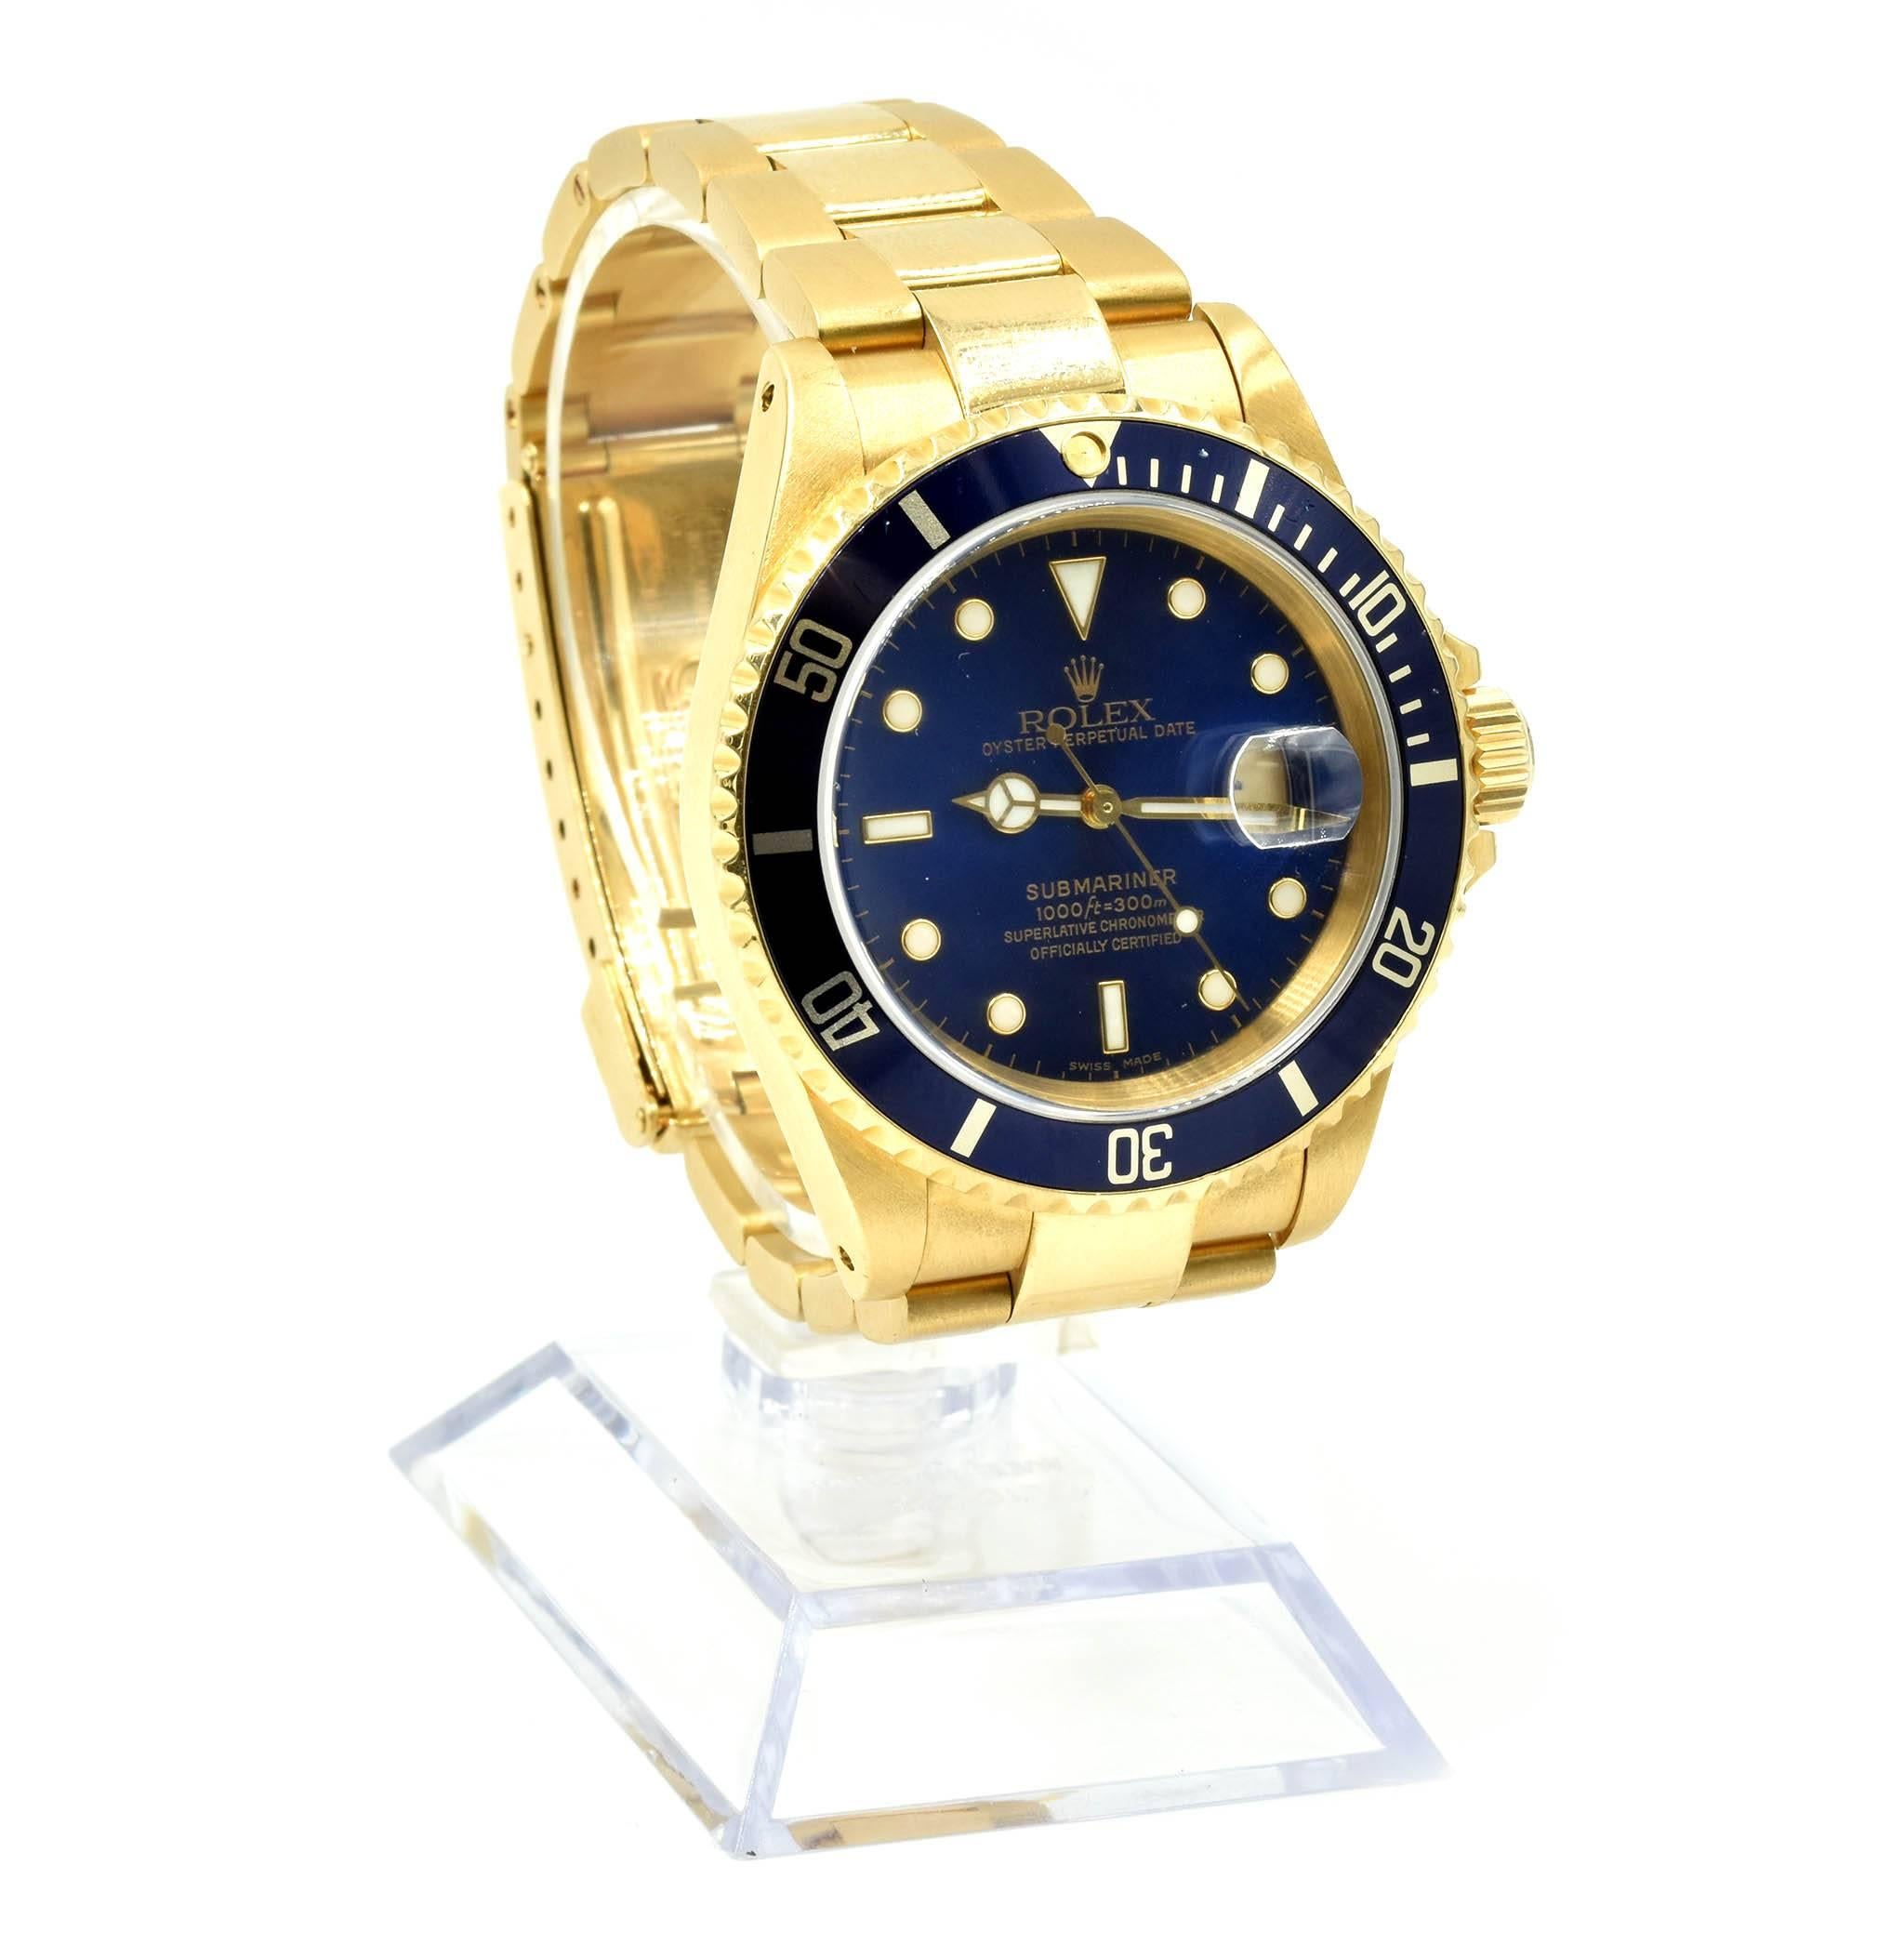 Movement: automatic 3135 movement
Function: hours, minutes, sweep seconds, date
Case: 40mm 18k yellow gold case and bezel with blue insert, sapphire crystal
Band: 18k yellow gold bracelet with fold-over clasp, fits up to a 7-inch wrist
Dial: blue